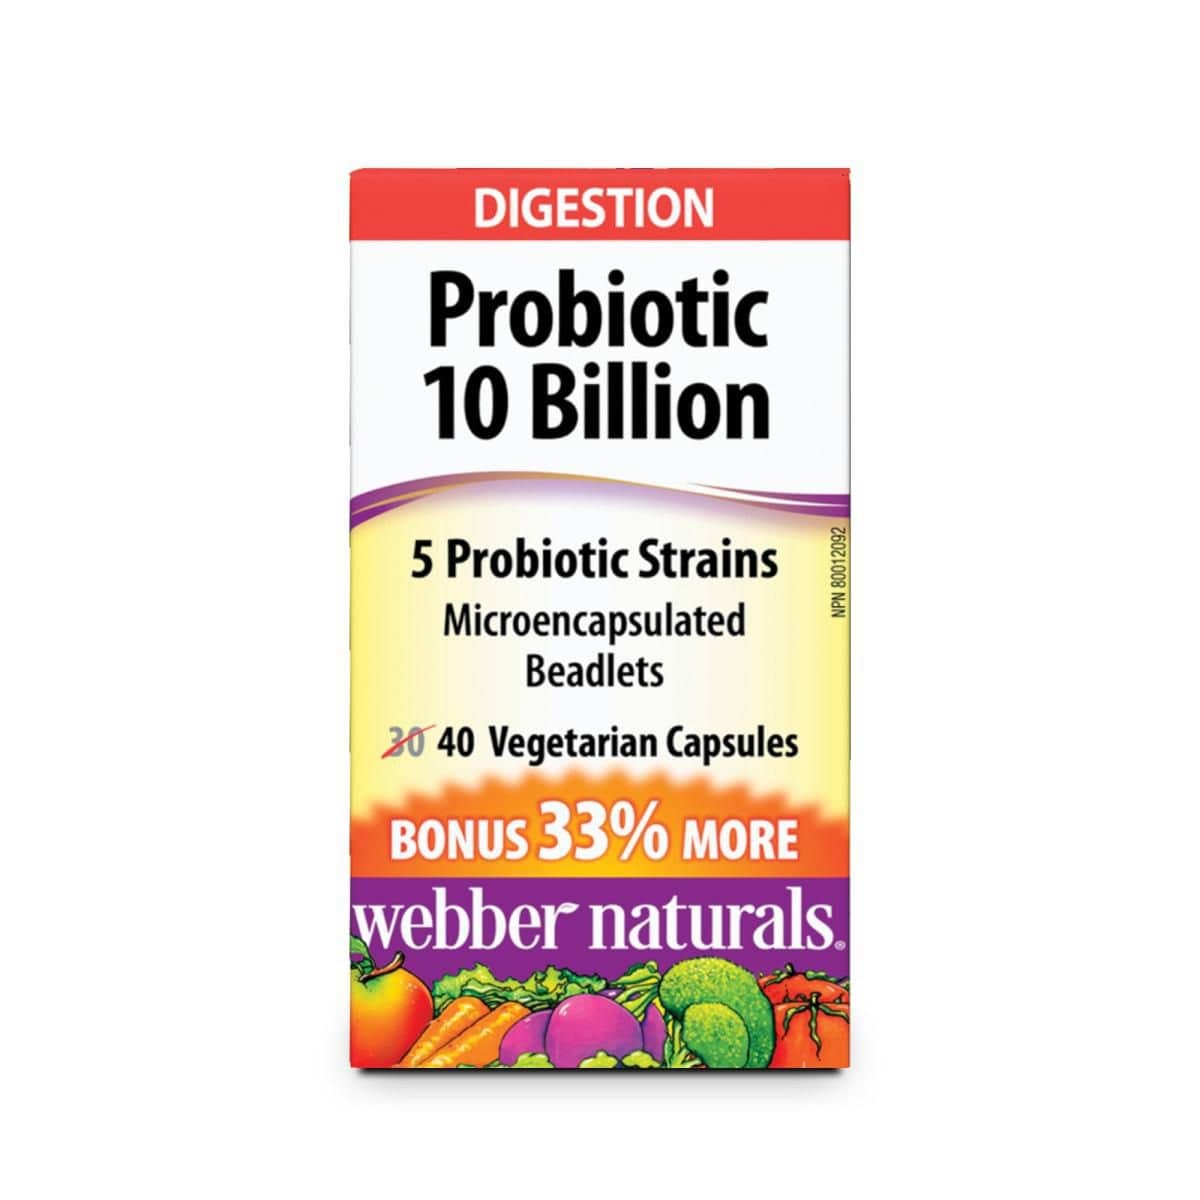 Product label for webber naturals Probiotic 10 Billion with 5 Probiotic Strains (40 capsules) in French